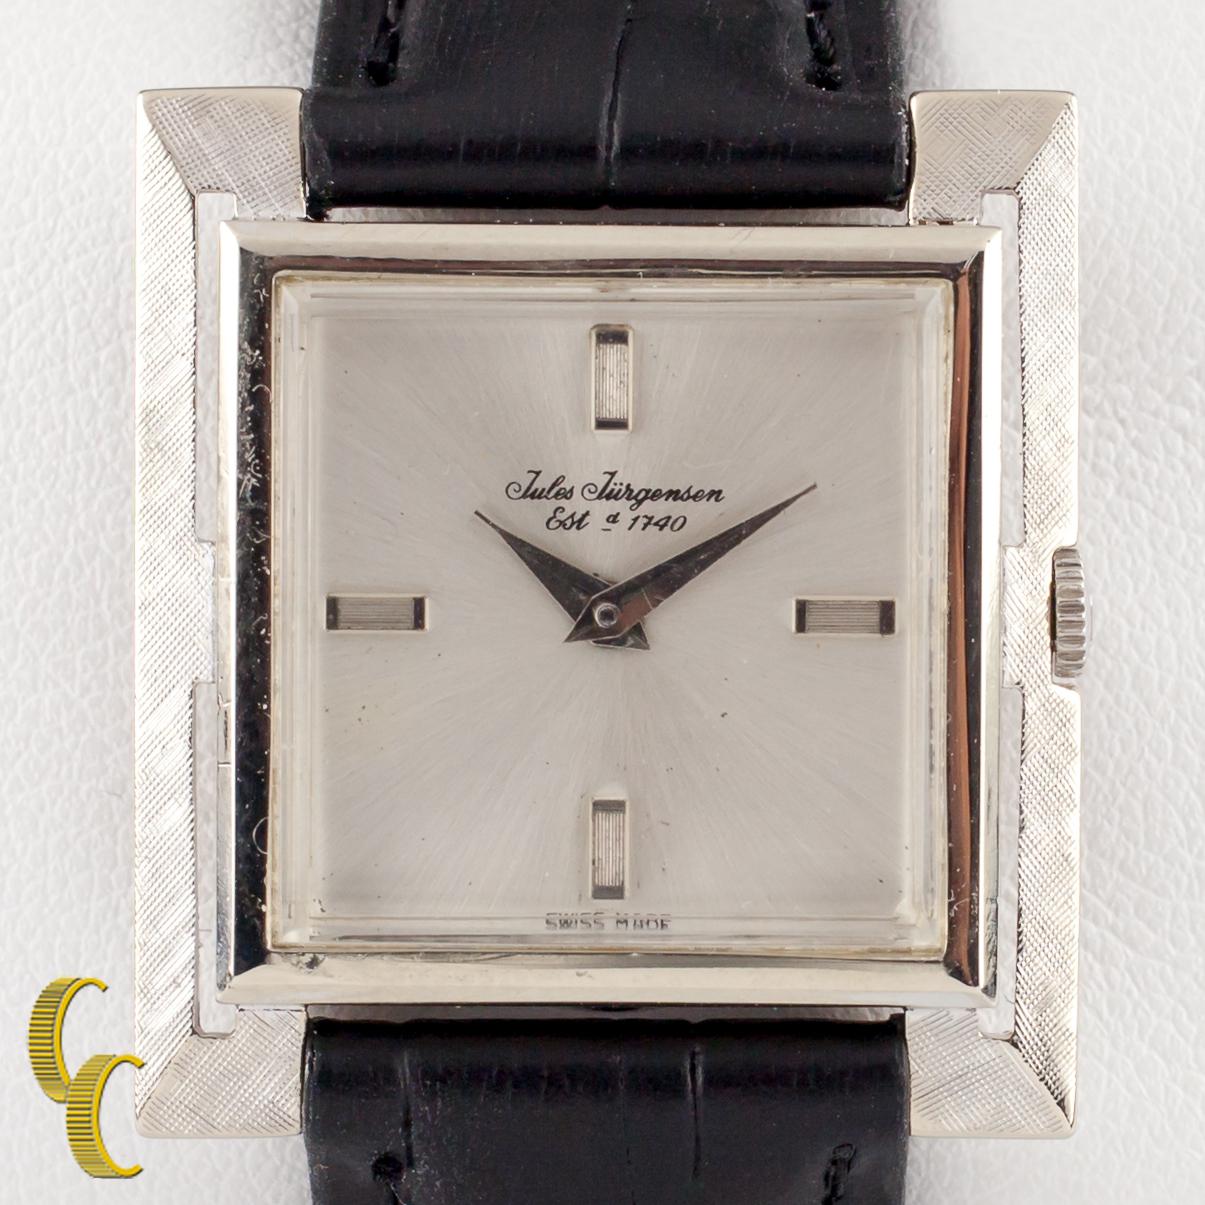 Jules Jurgensen 14k White Gold Mechanical Hand-Winding Watch w/ Leather Band
Movement #FHF34-21-302581
Case #5350001

14k White Gold Textured Square Case
27 mm Wide
22 mm Long
Lug-to-Lug Distance = 30 mm
Thickness = 6 mm

Silver Dial w/ Textured